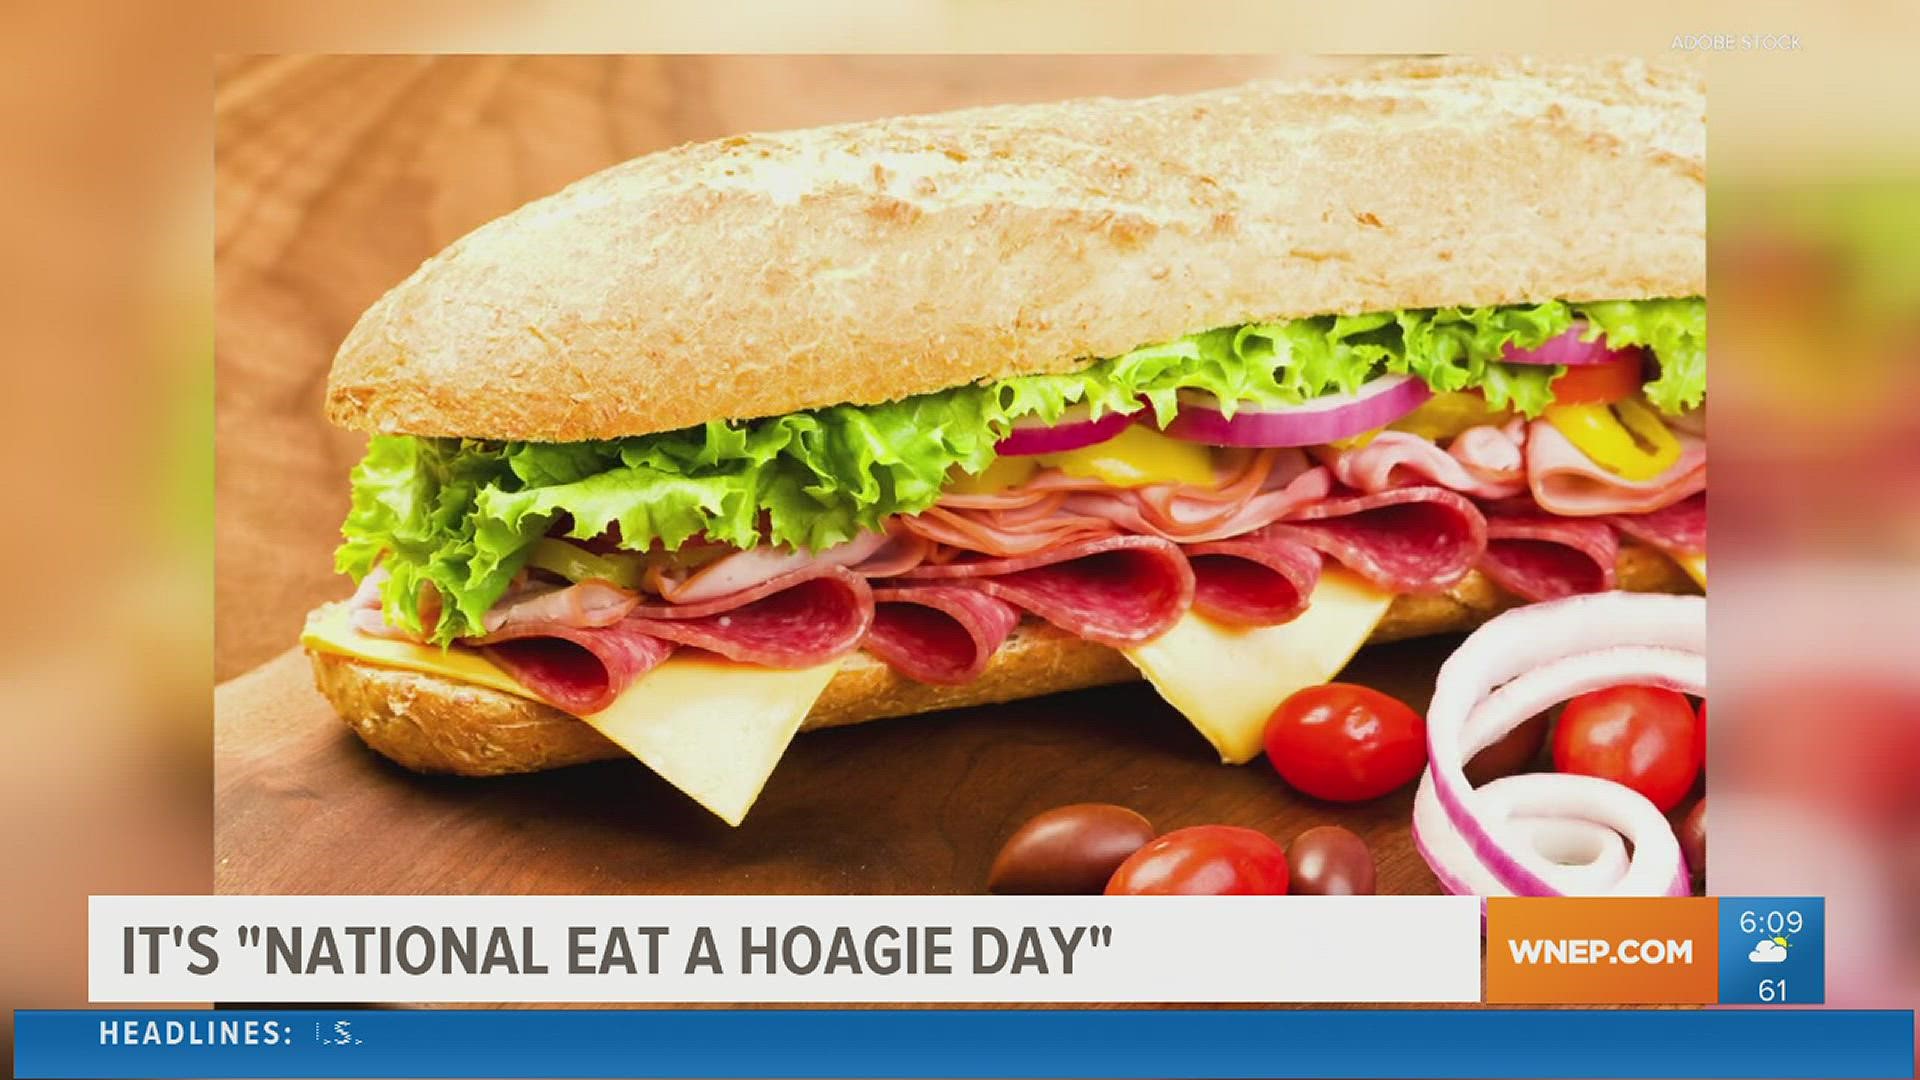 They come in all sizes & go by the name hoagie, grinder, or subs. But, when it comes to those sandwiches, our area doesn’t mess around. Here are your favorite spots.